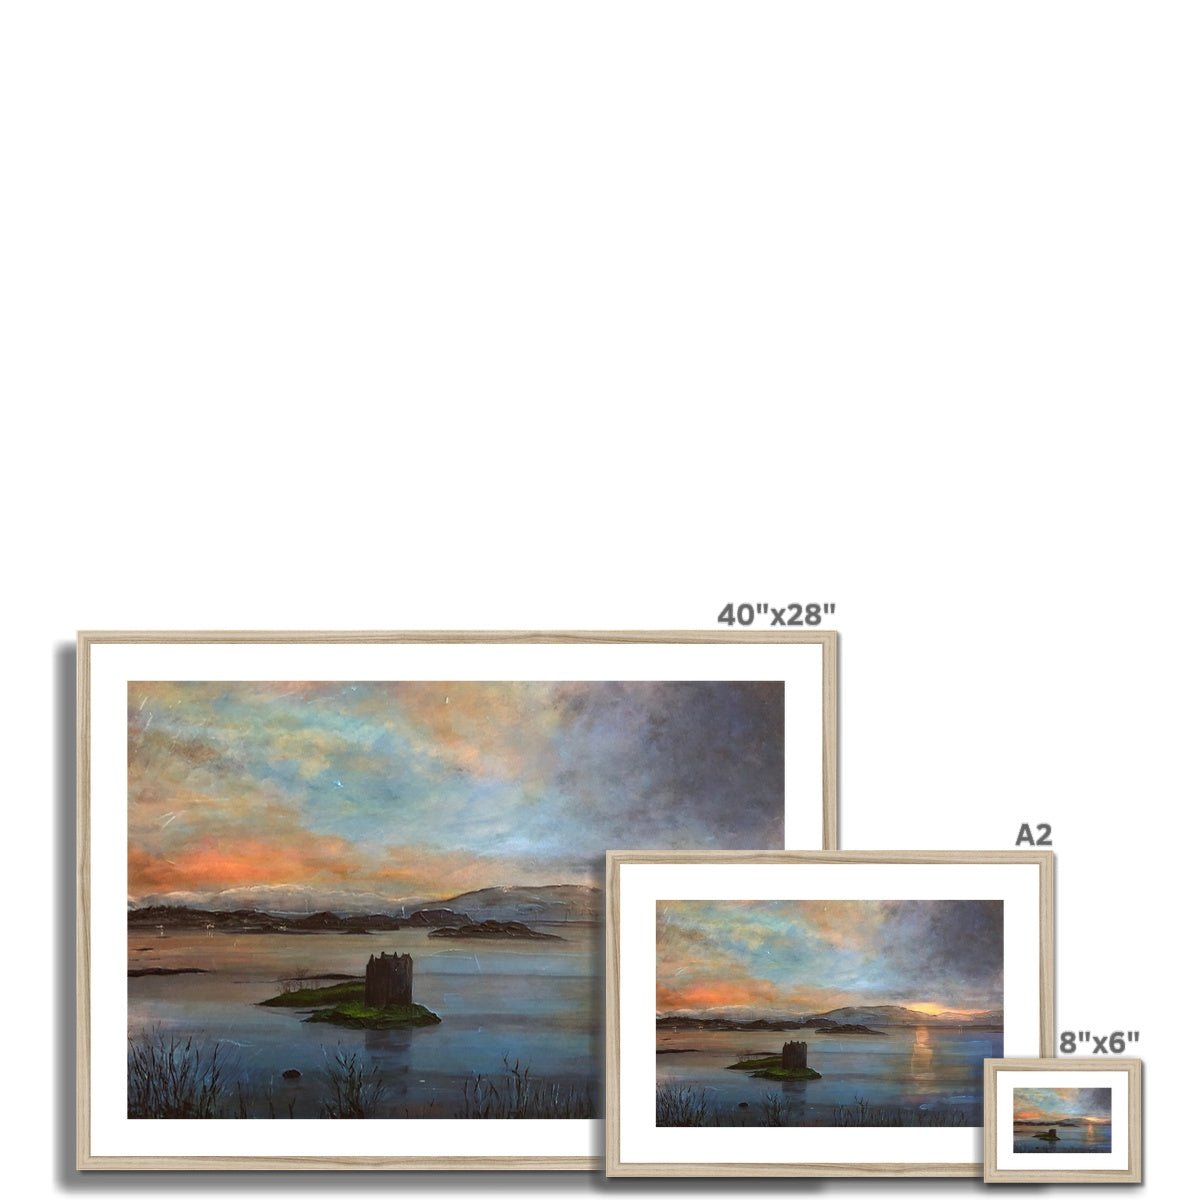 Castle Stalker Twilight Painting | Framed & Mounted Prints From Scotland-Framed & Mounted Prints-Historic & Iconic Scotland Art Gallery-Paintings, Prints, Homeware, Art Gifts From Scotland By Scottish Artist Kevin Hunter